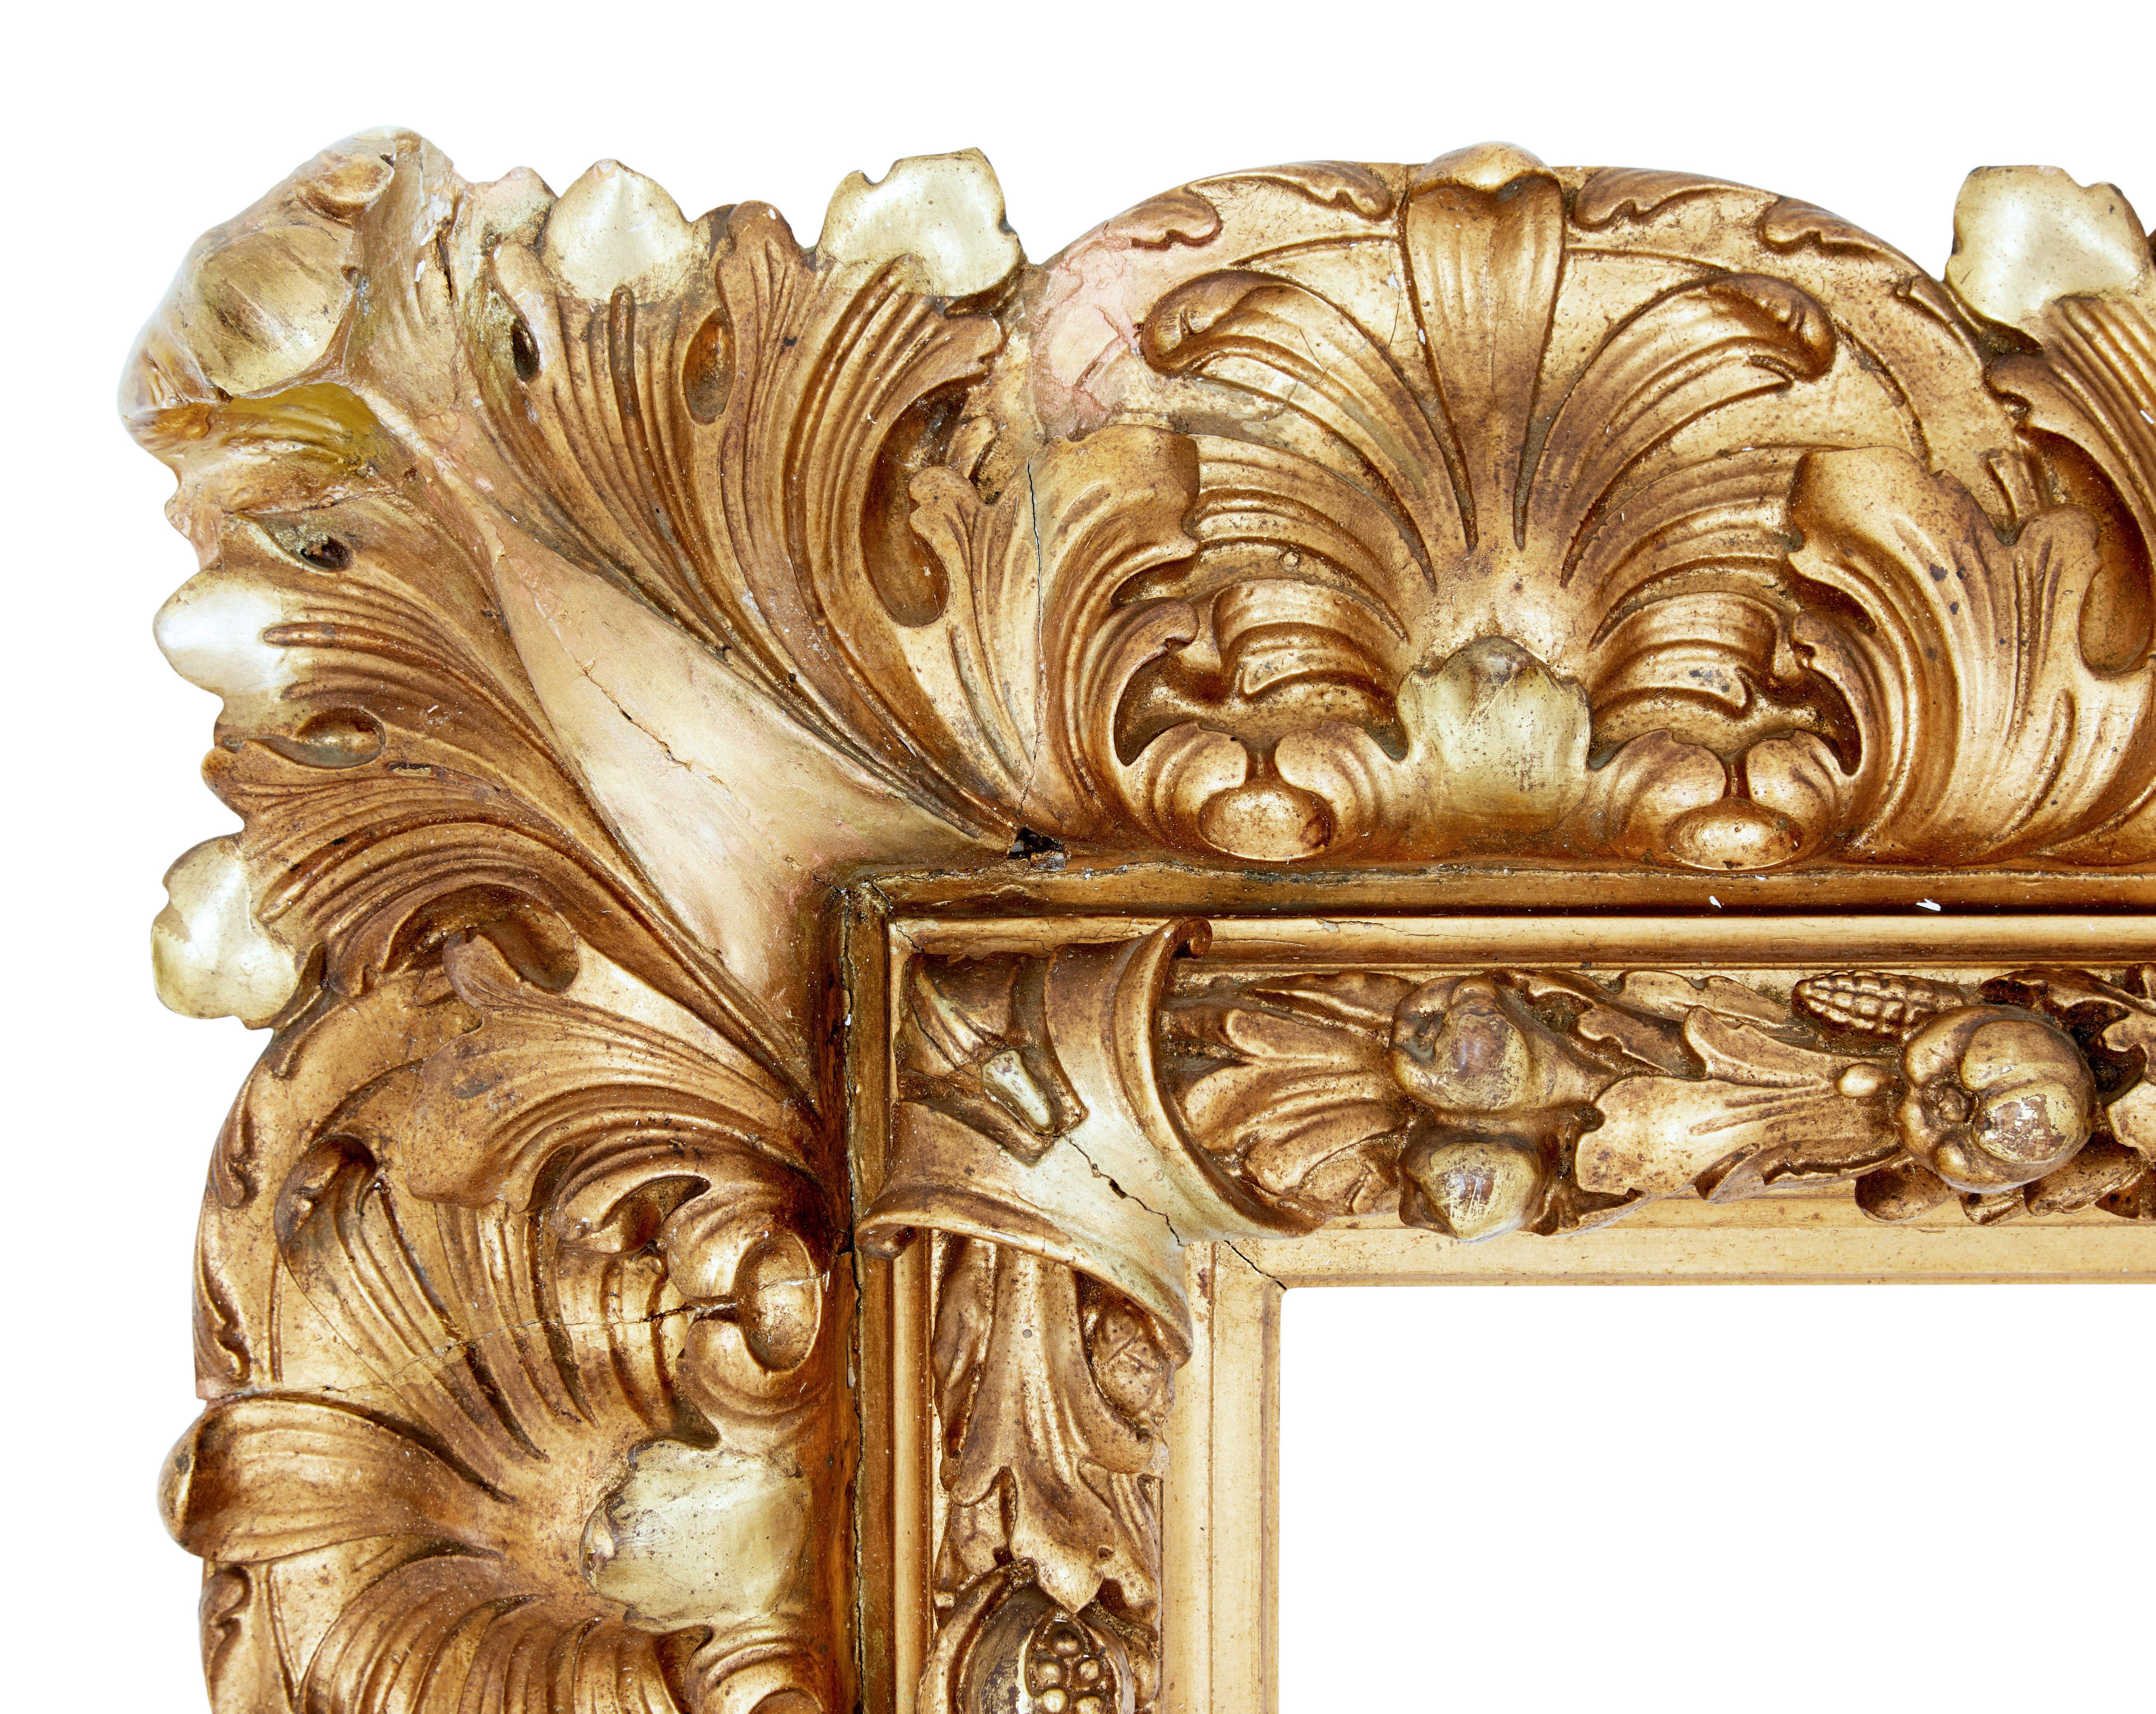 Large impressive 19th century rococo revival gilt frame circa 1890

Great opportunity to turn this decorative frame into a fantastic wall decoration.  Inner slip with carved pods and leaves surrounded by scrolling leaves on the outside.

Internal